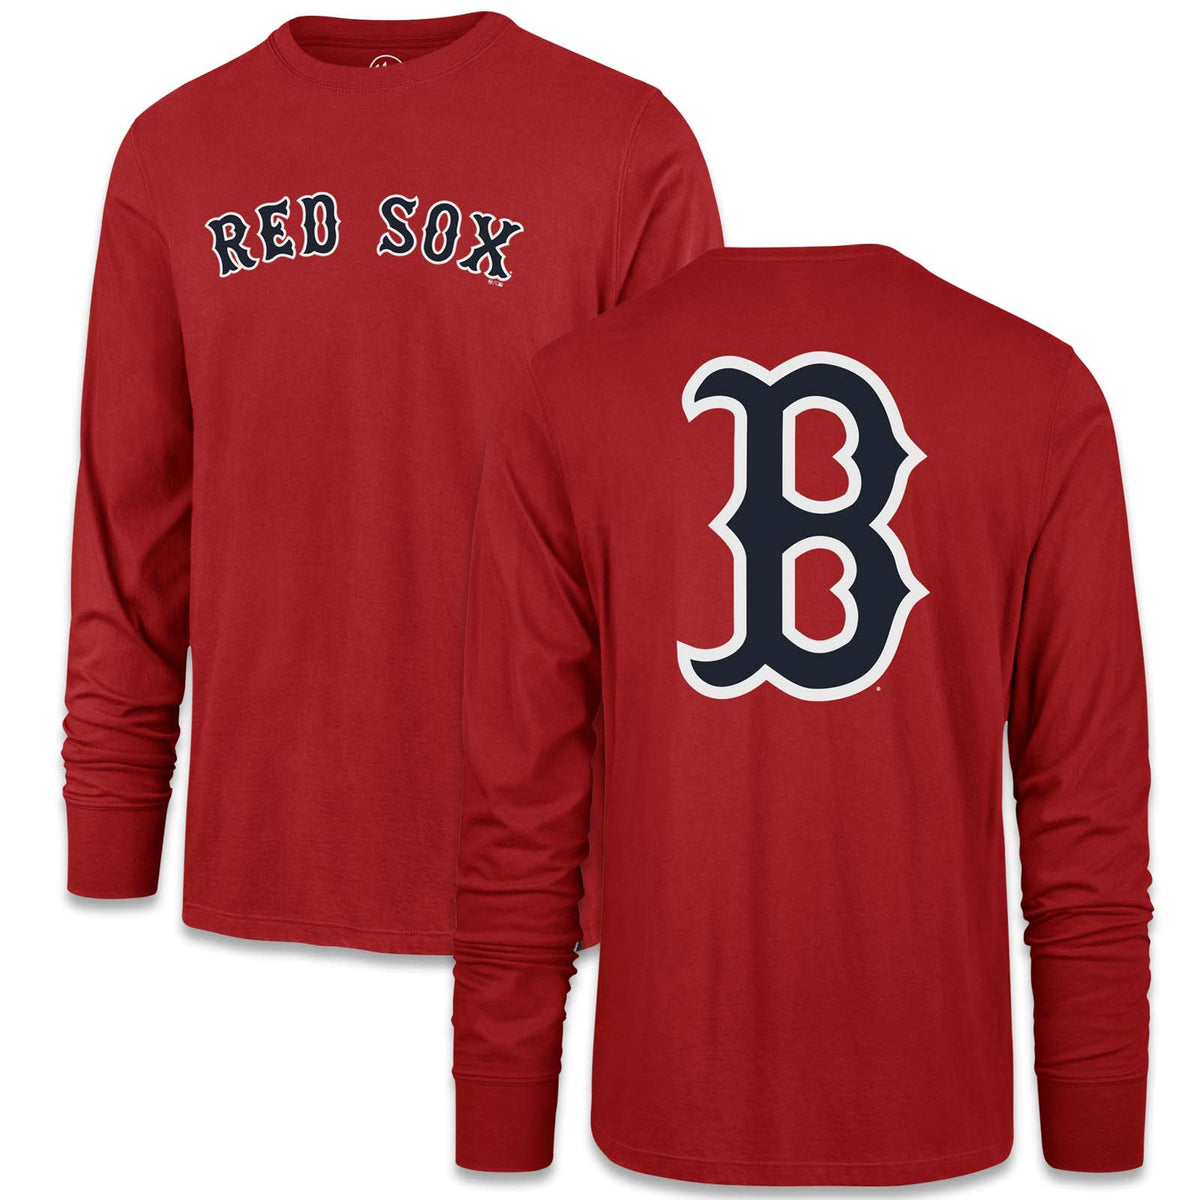 red sox red shirt